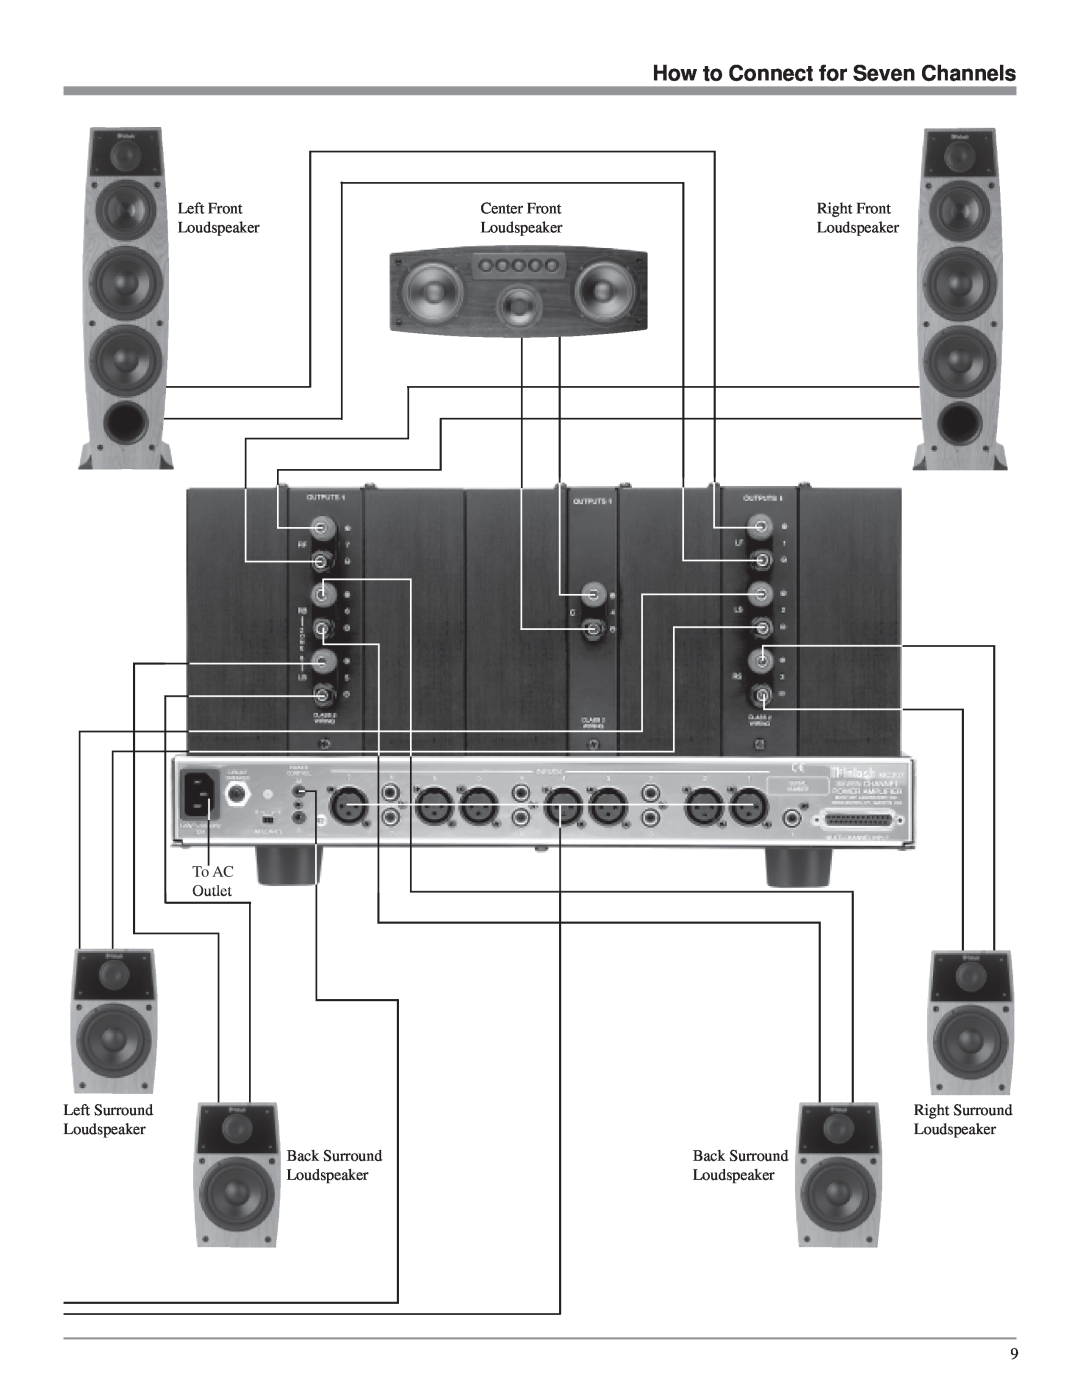 McIntosh MC207 How to Connect for Seven Channels, Left Front Loudspeaker To AC Outlet, Center Front Loudspeaker 